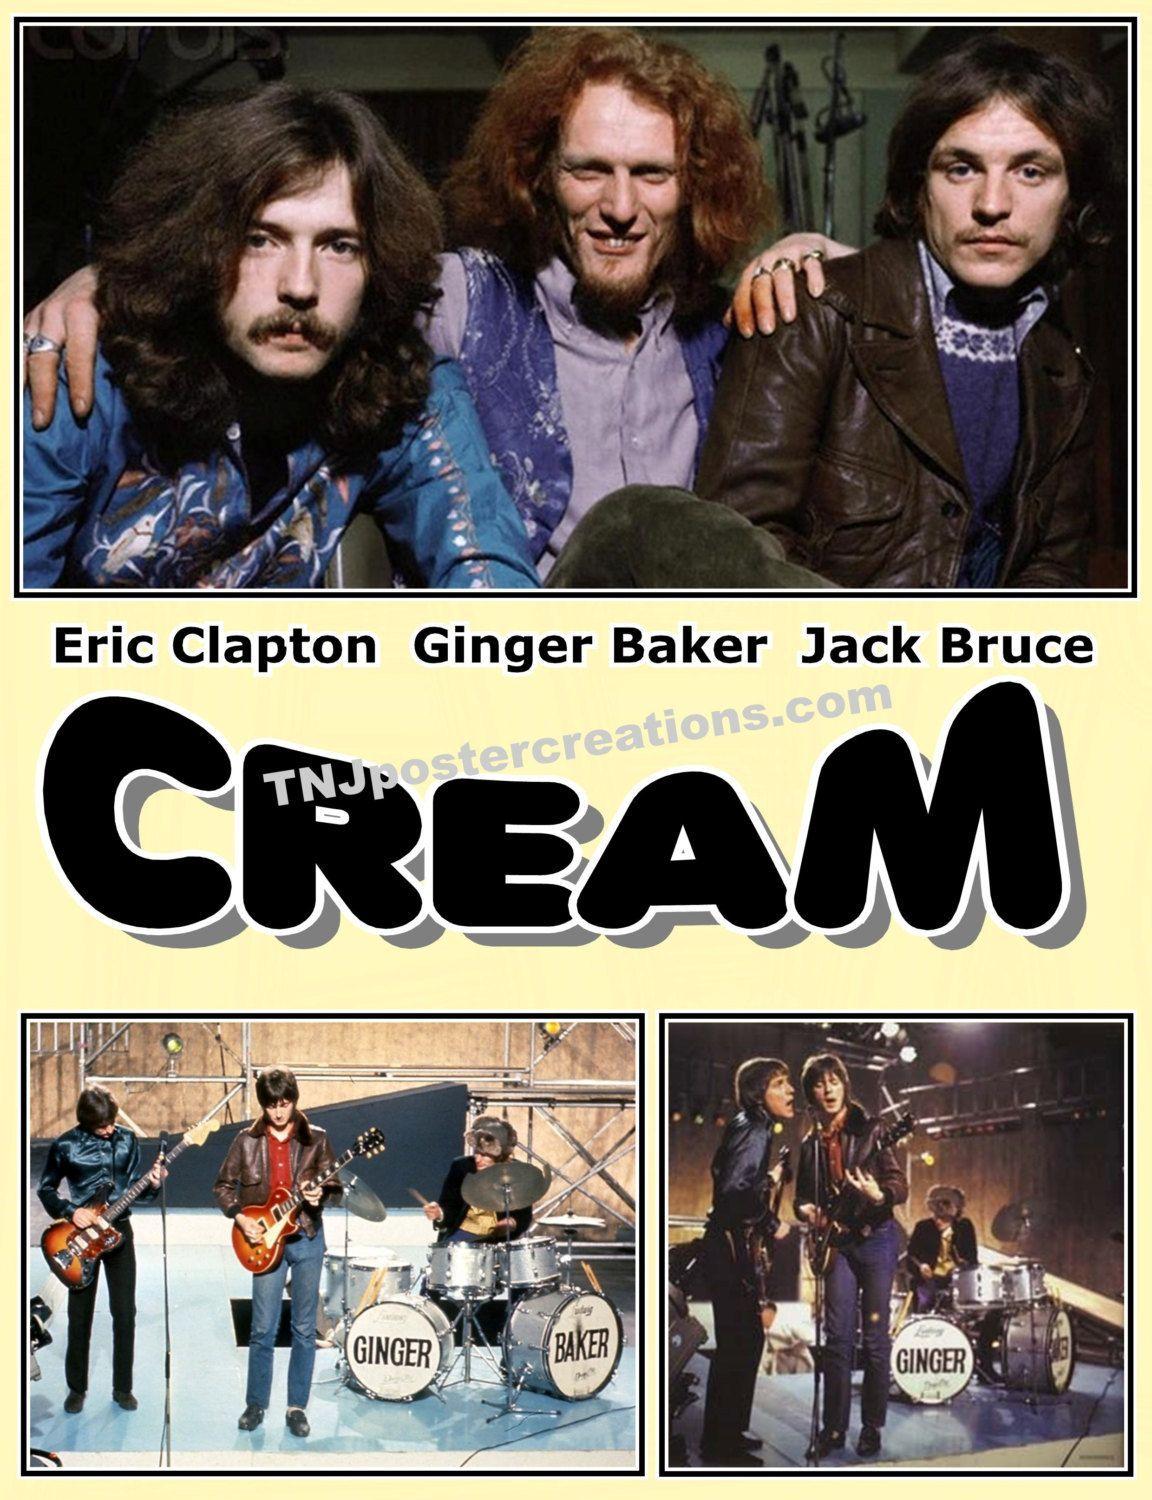 Cream Rock Group Logo - Rock Band “Cream” Poster in 2019 | Days of REAL Music Remembered ...